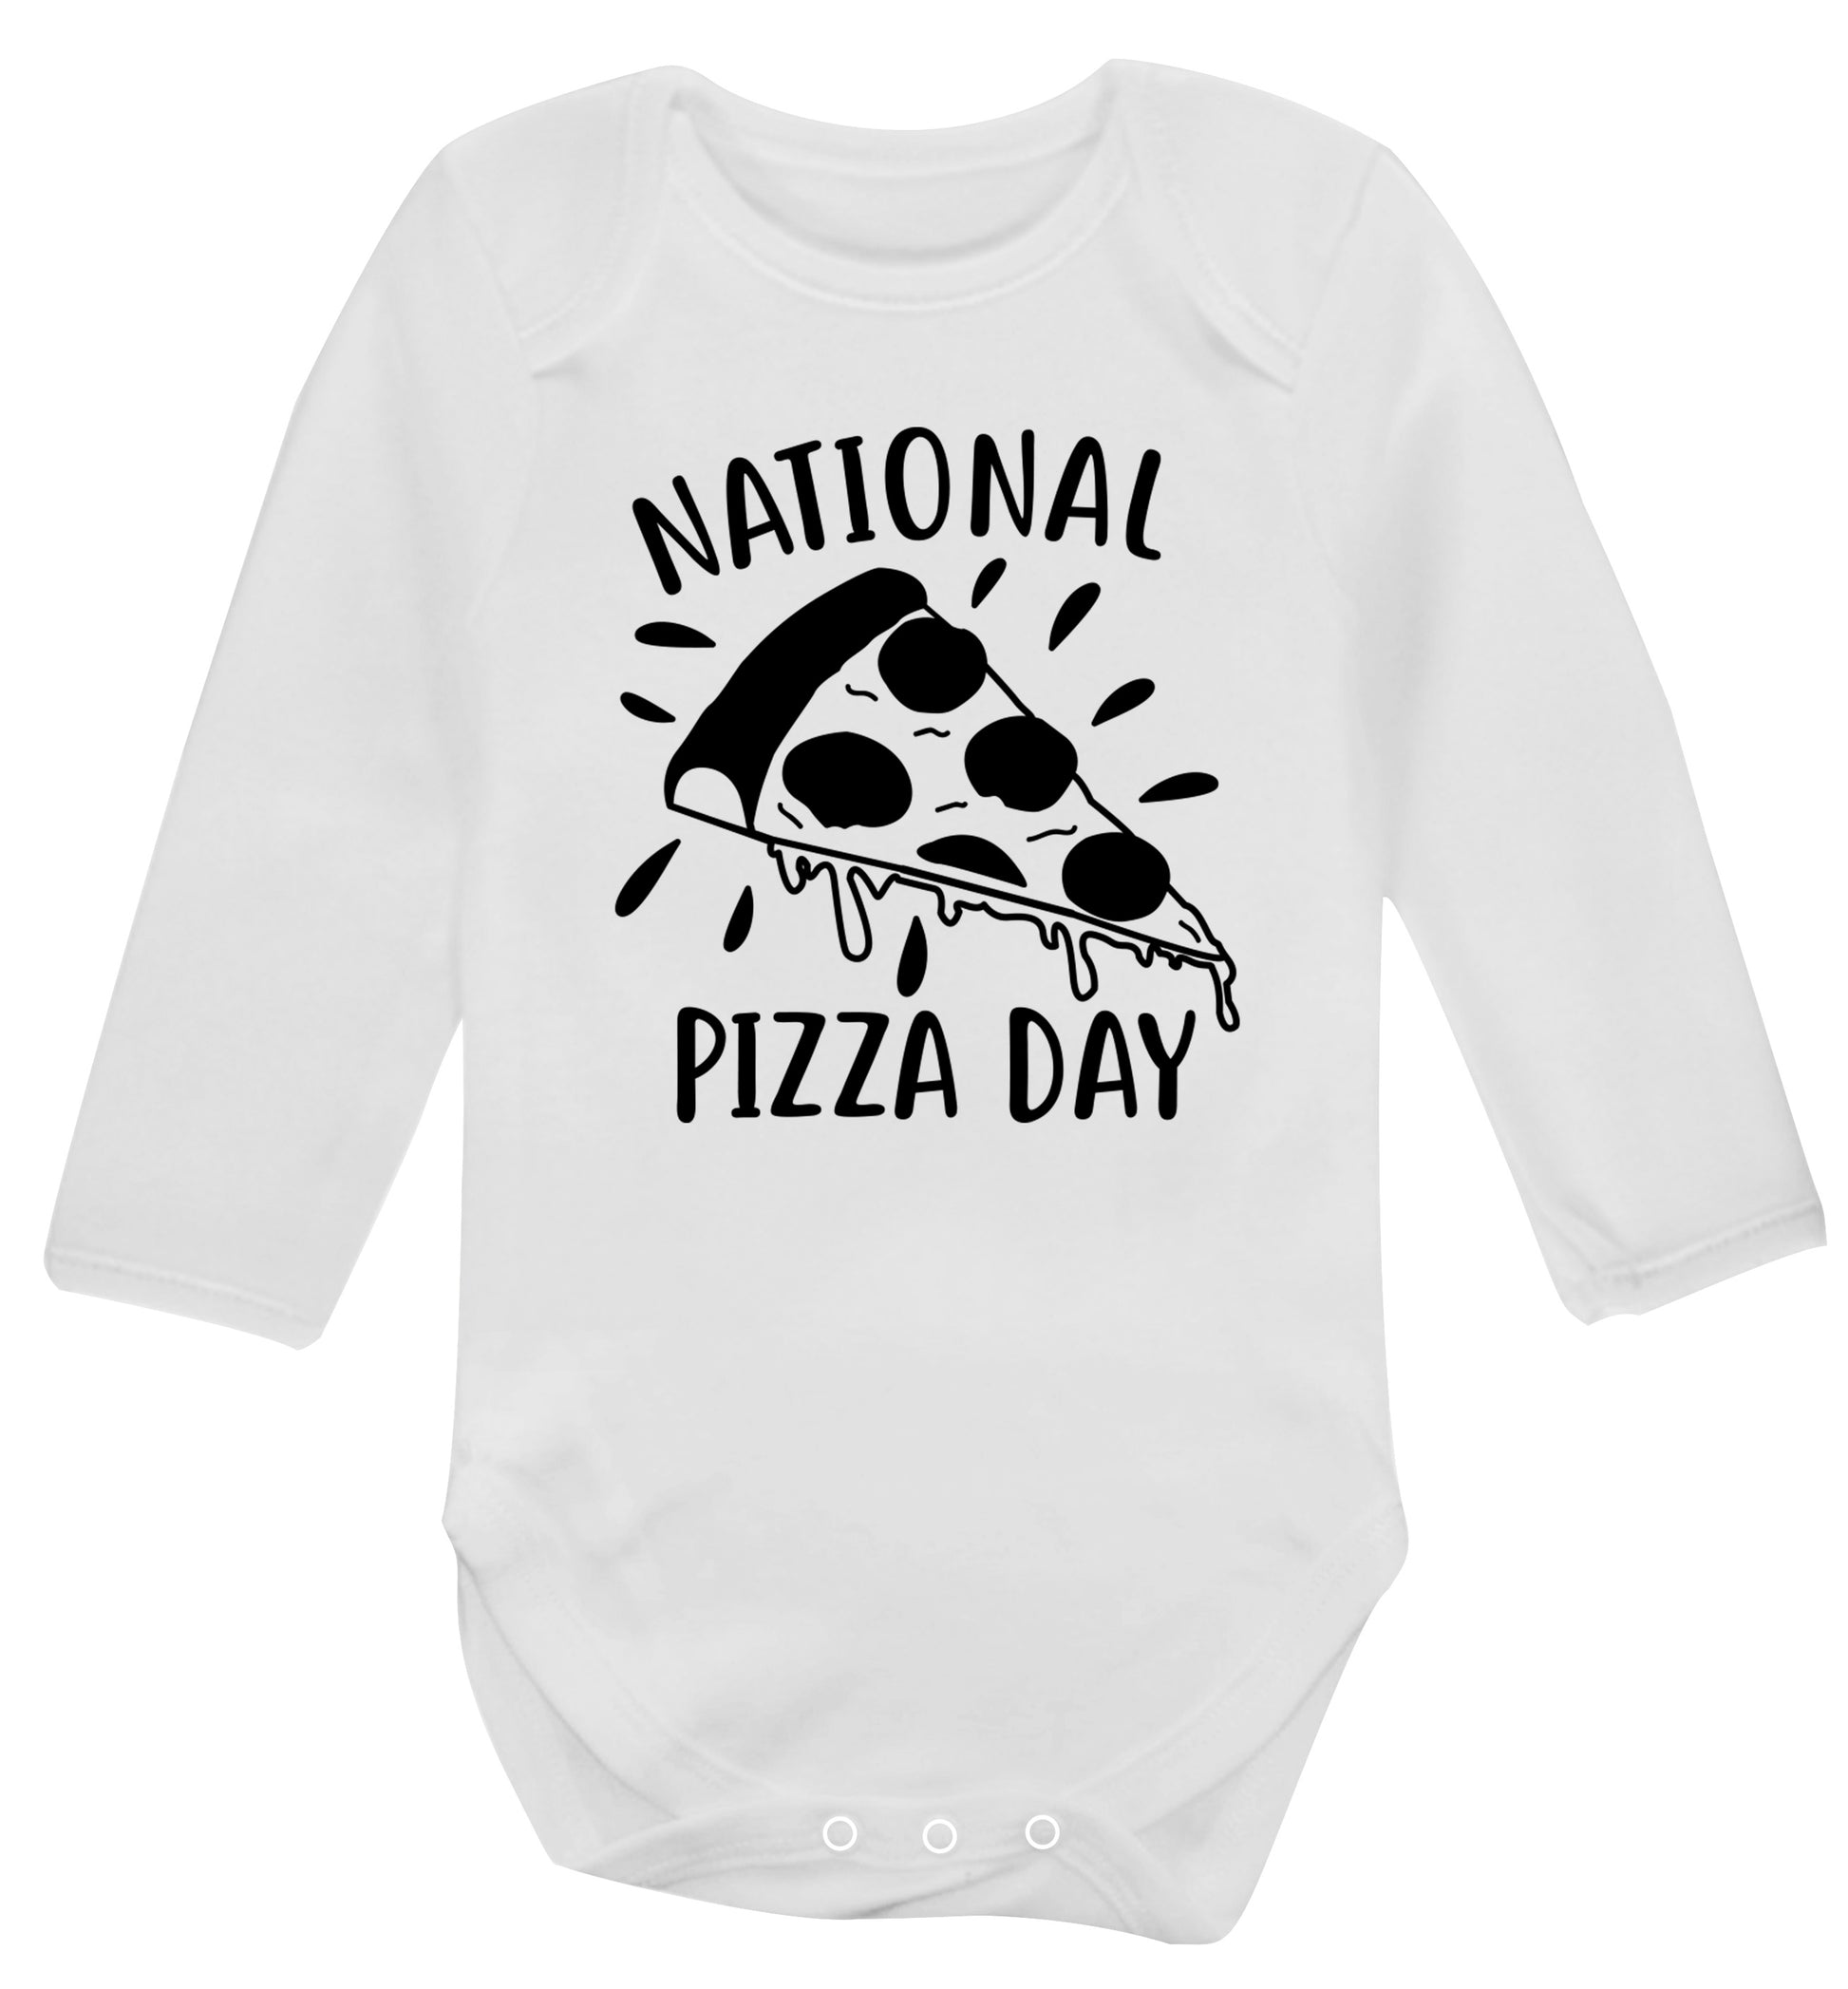 National pizza day Baby Vest long sleeved white 6-12 months